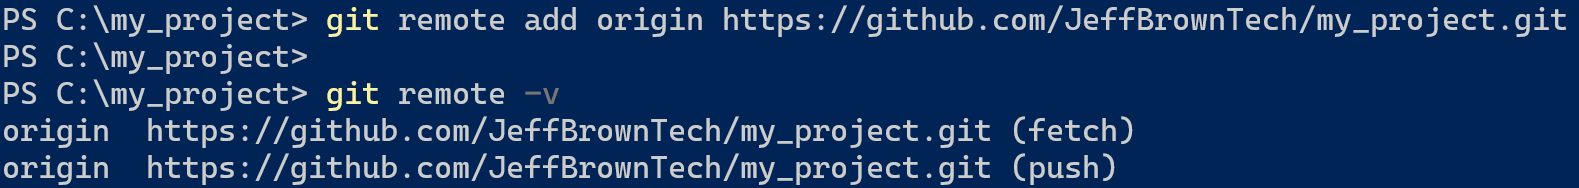 a screenshot of how to add a remote URL ahead of merging in Git